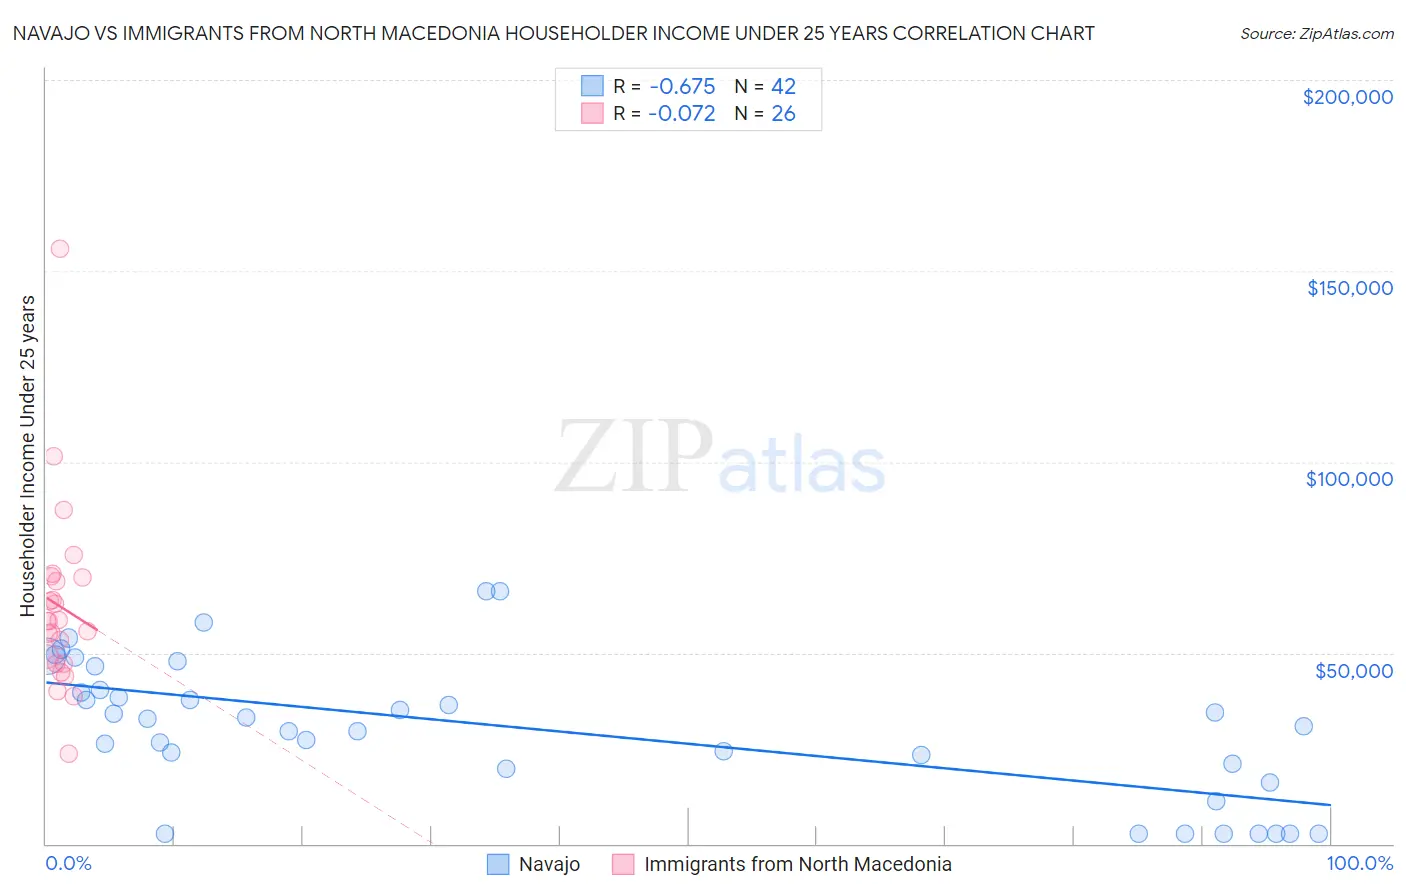 Navajo vs Immigrants from North Macedonia Householder Income Under 25 years